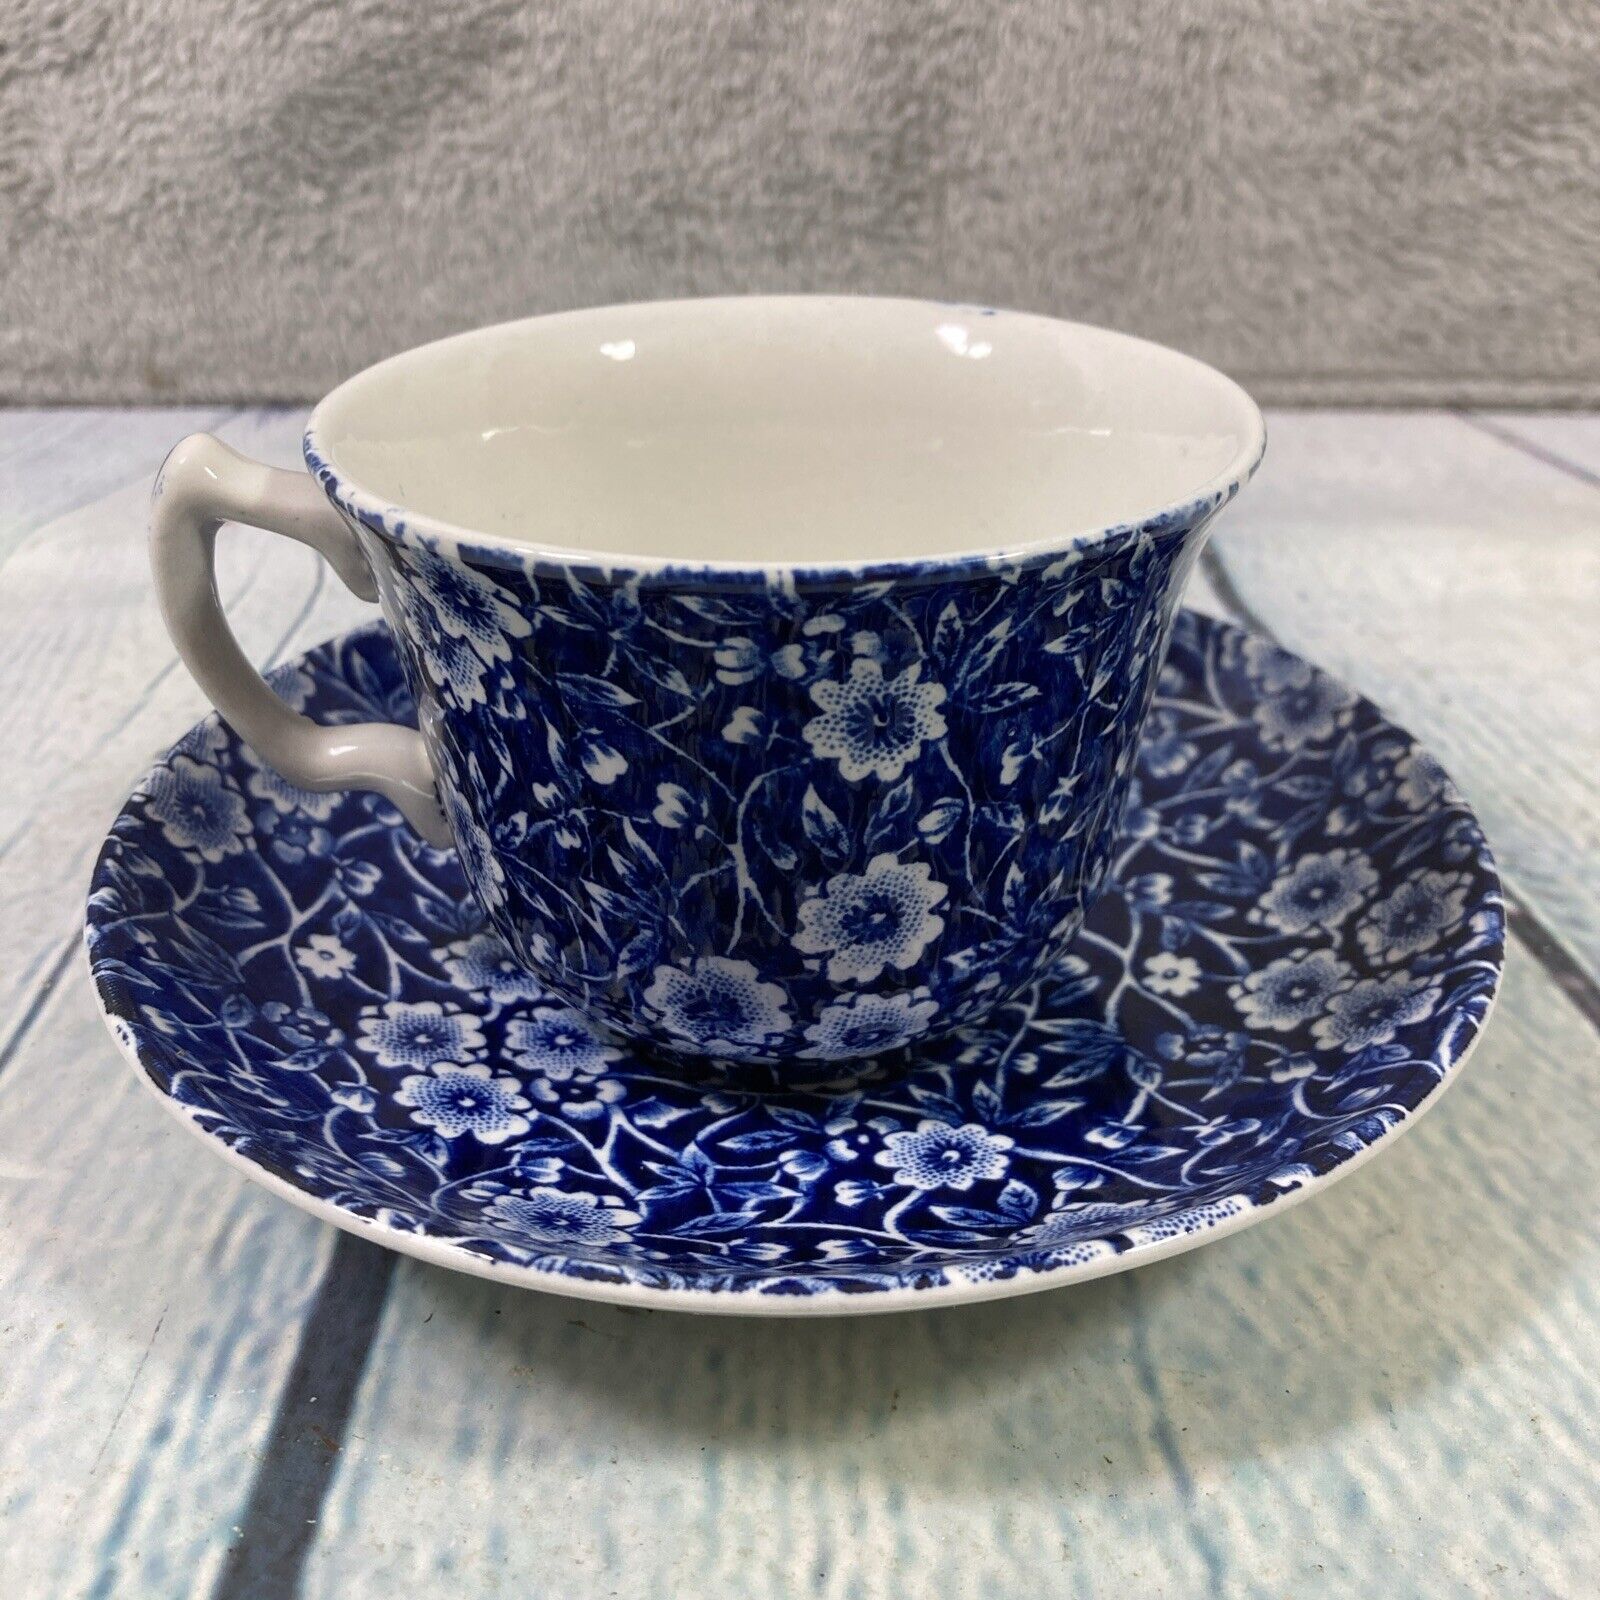 Calico Flat Cup and Saucer Blue White Tea Coffee Flowers Made in England / L1